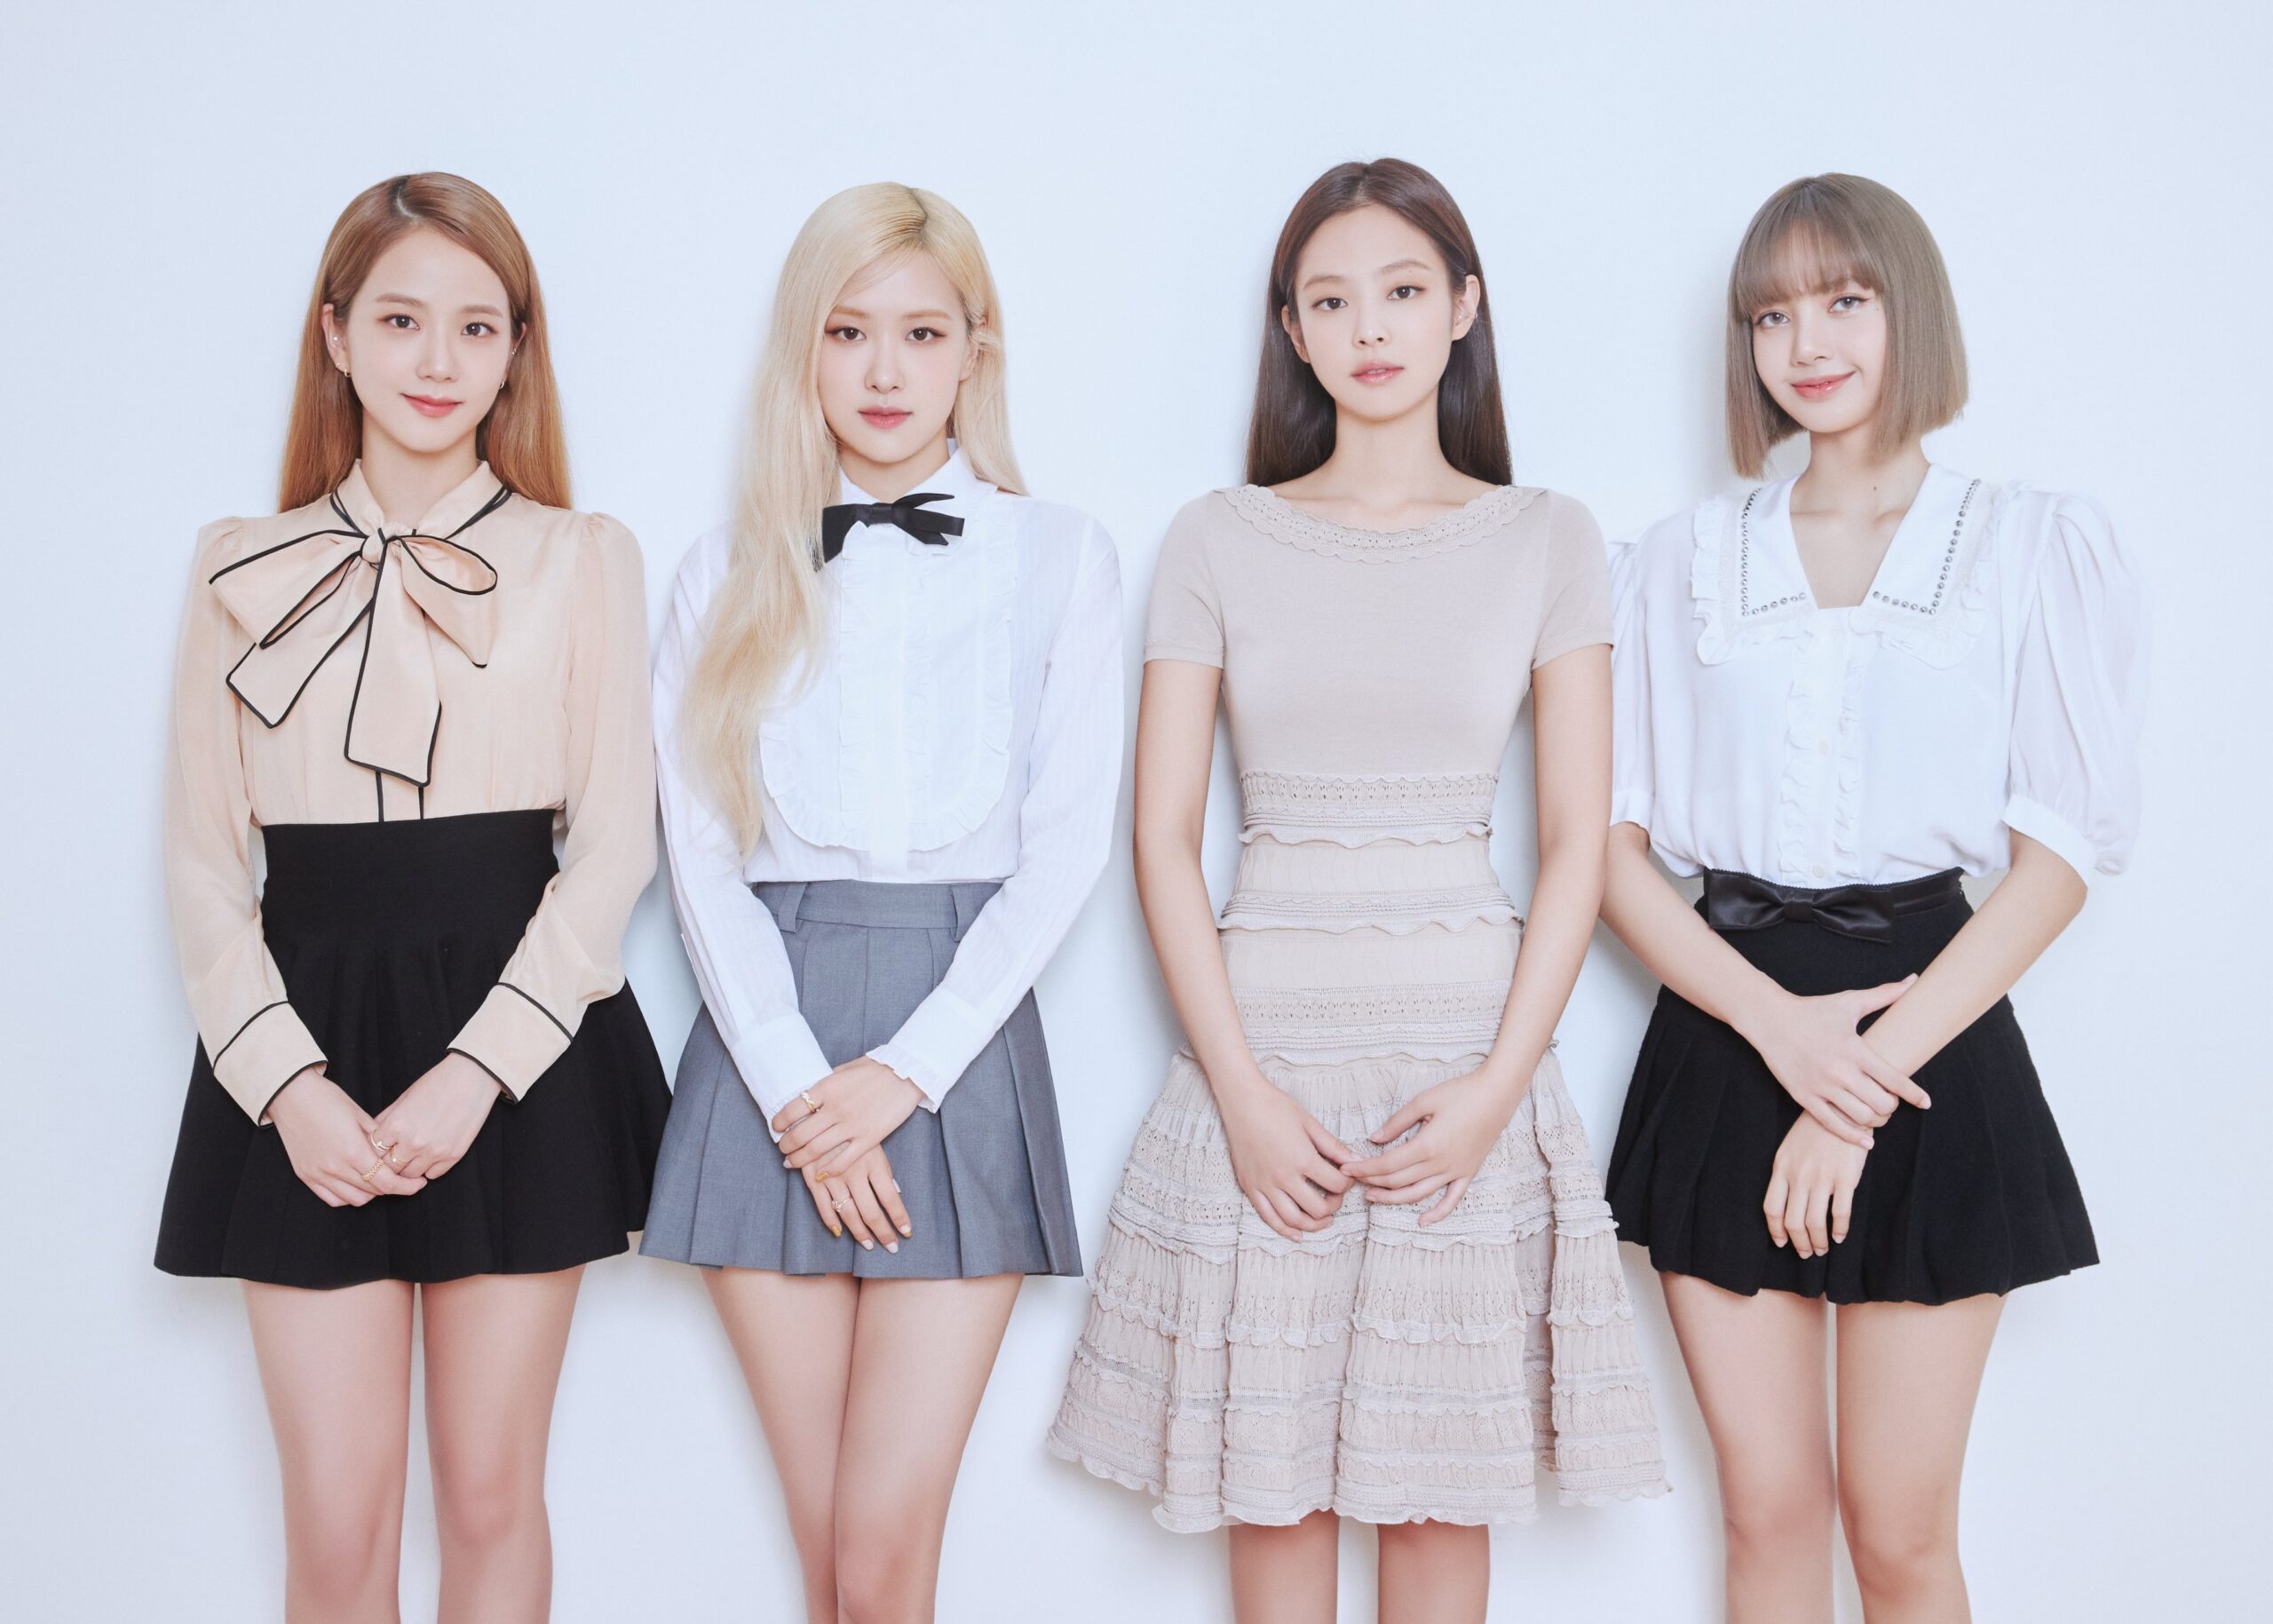 BLACKPINK is holding its first-ever in-game concert in PUBG Mobile